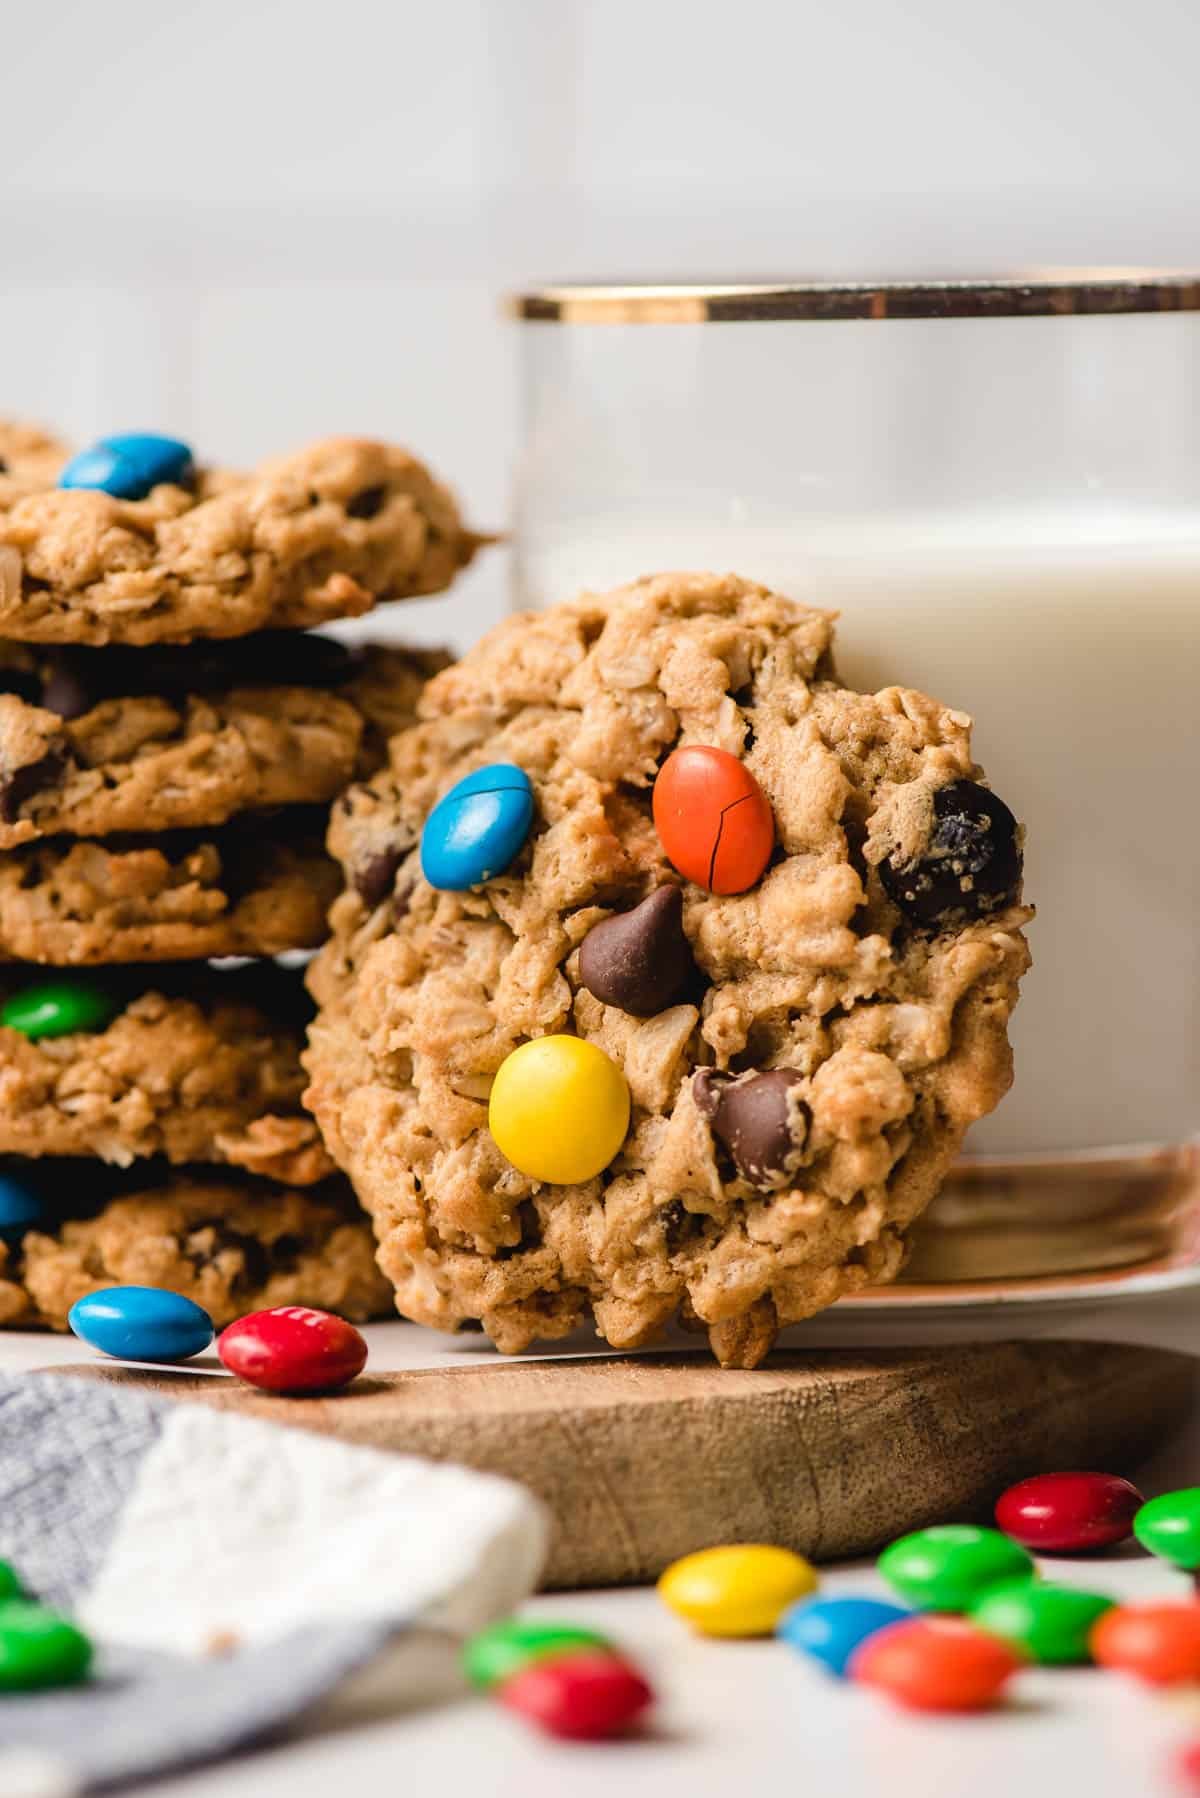 A stack of Gluten Self-ruling Monster Cookies with a glass of milk.